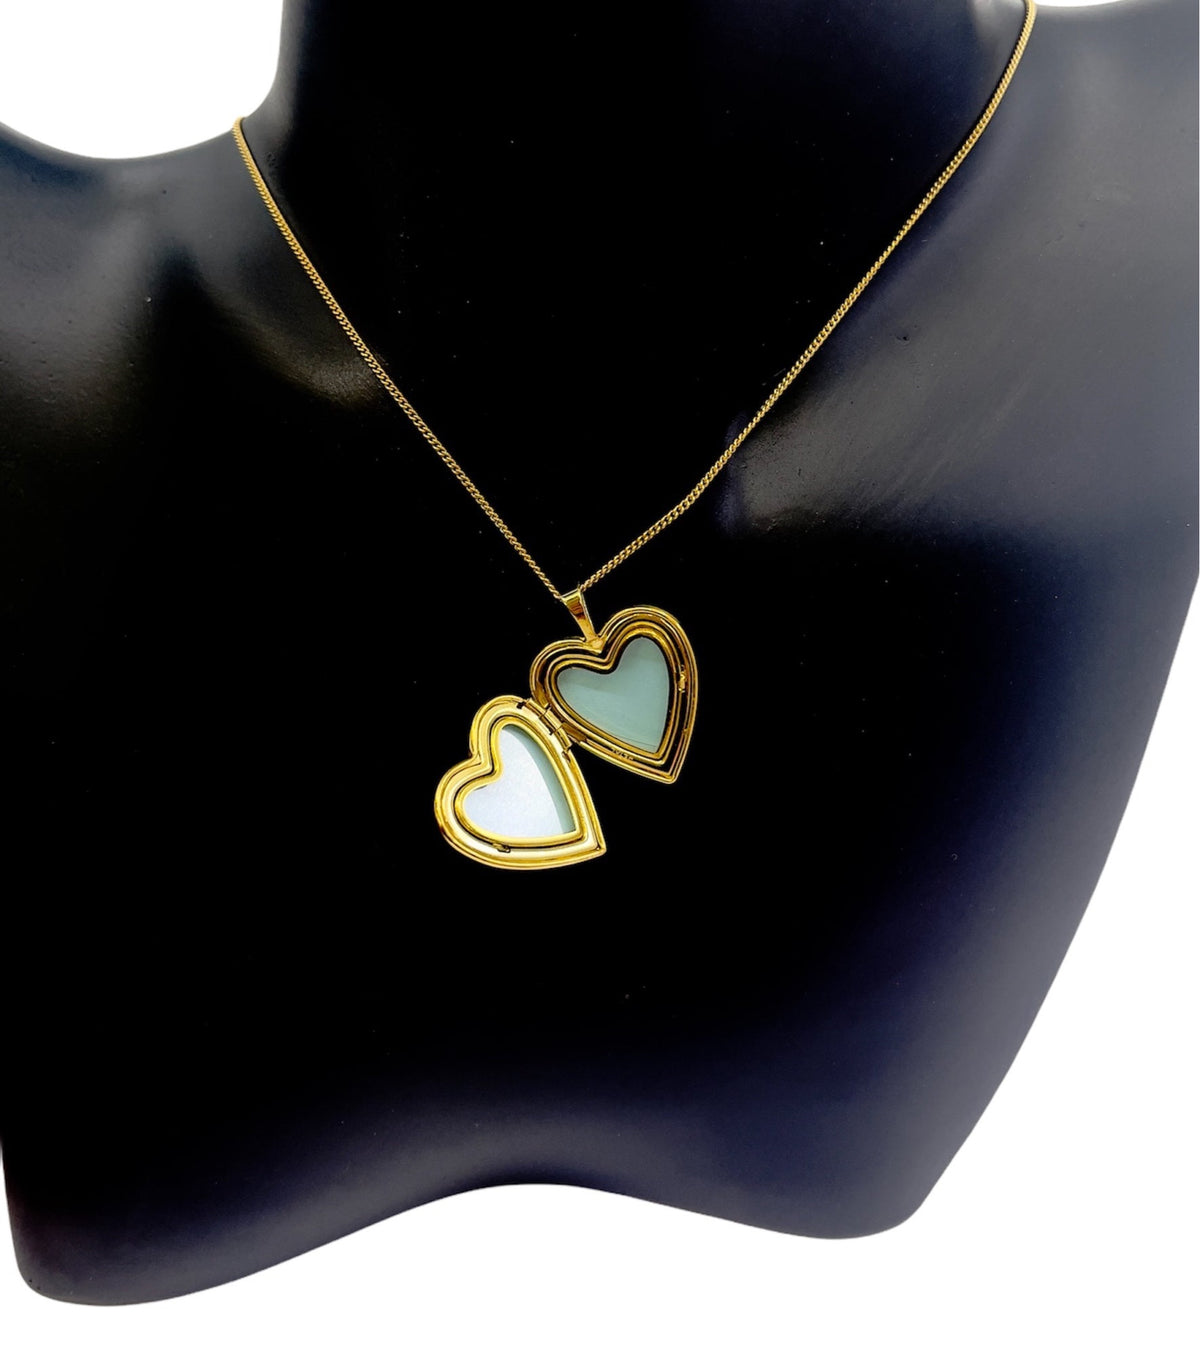 Gold Plated on 925 Sterling Silver Heart Shaped Locket with Etched Hearts Design - 21mm x 20mm